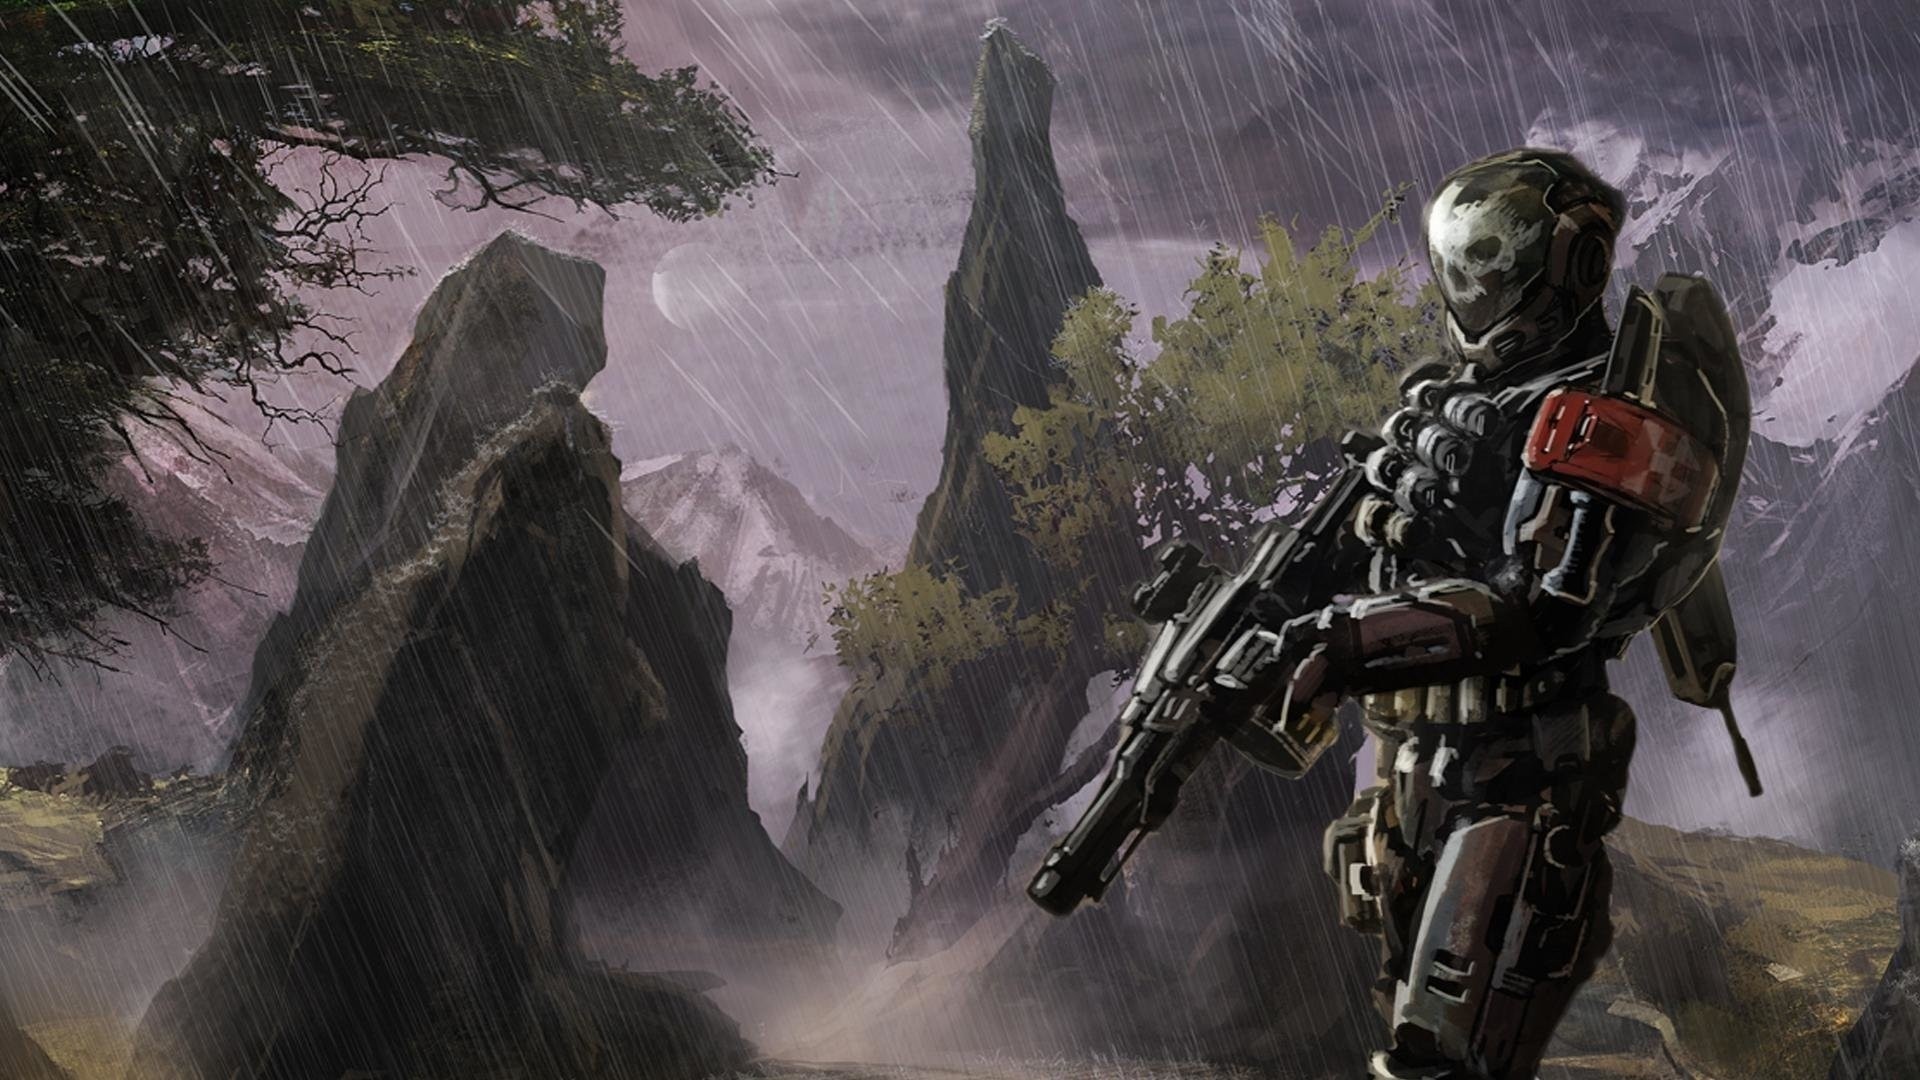 Halo: Reach gaming, Diverse wallpapers, Character showcase, Halo's finest moments, 1920x1080 Full HD Desktop